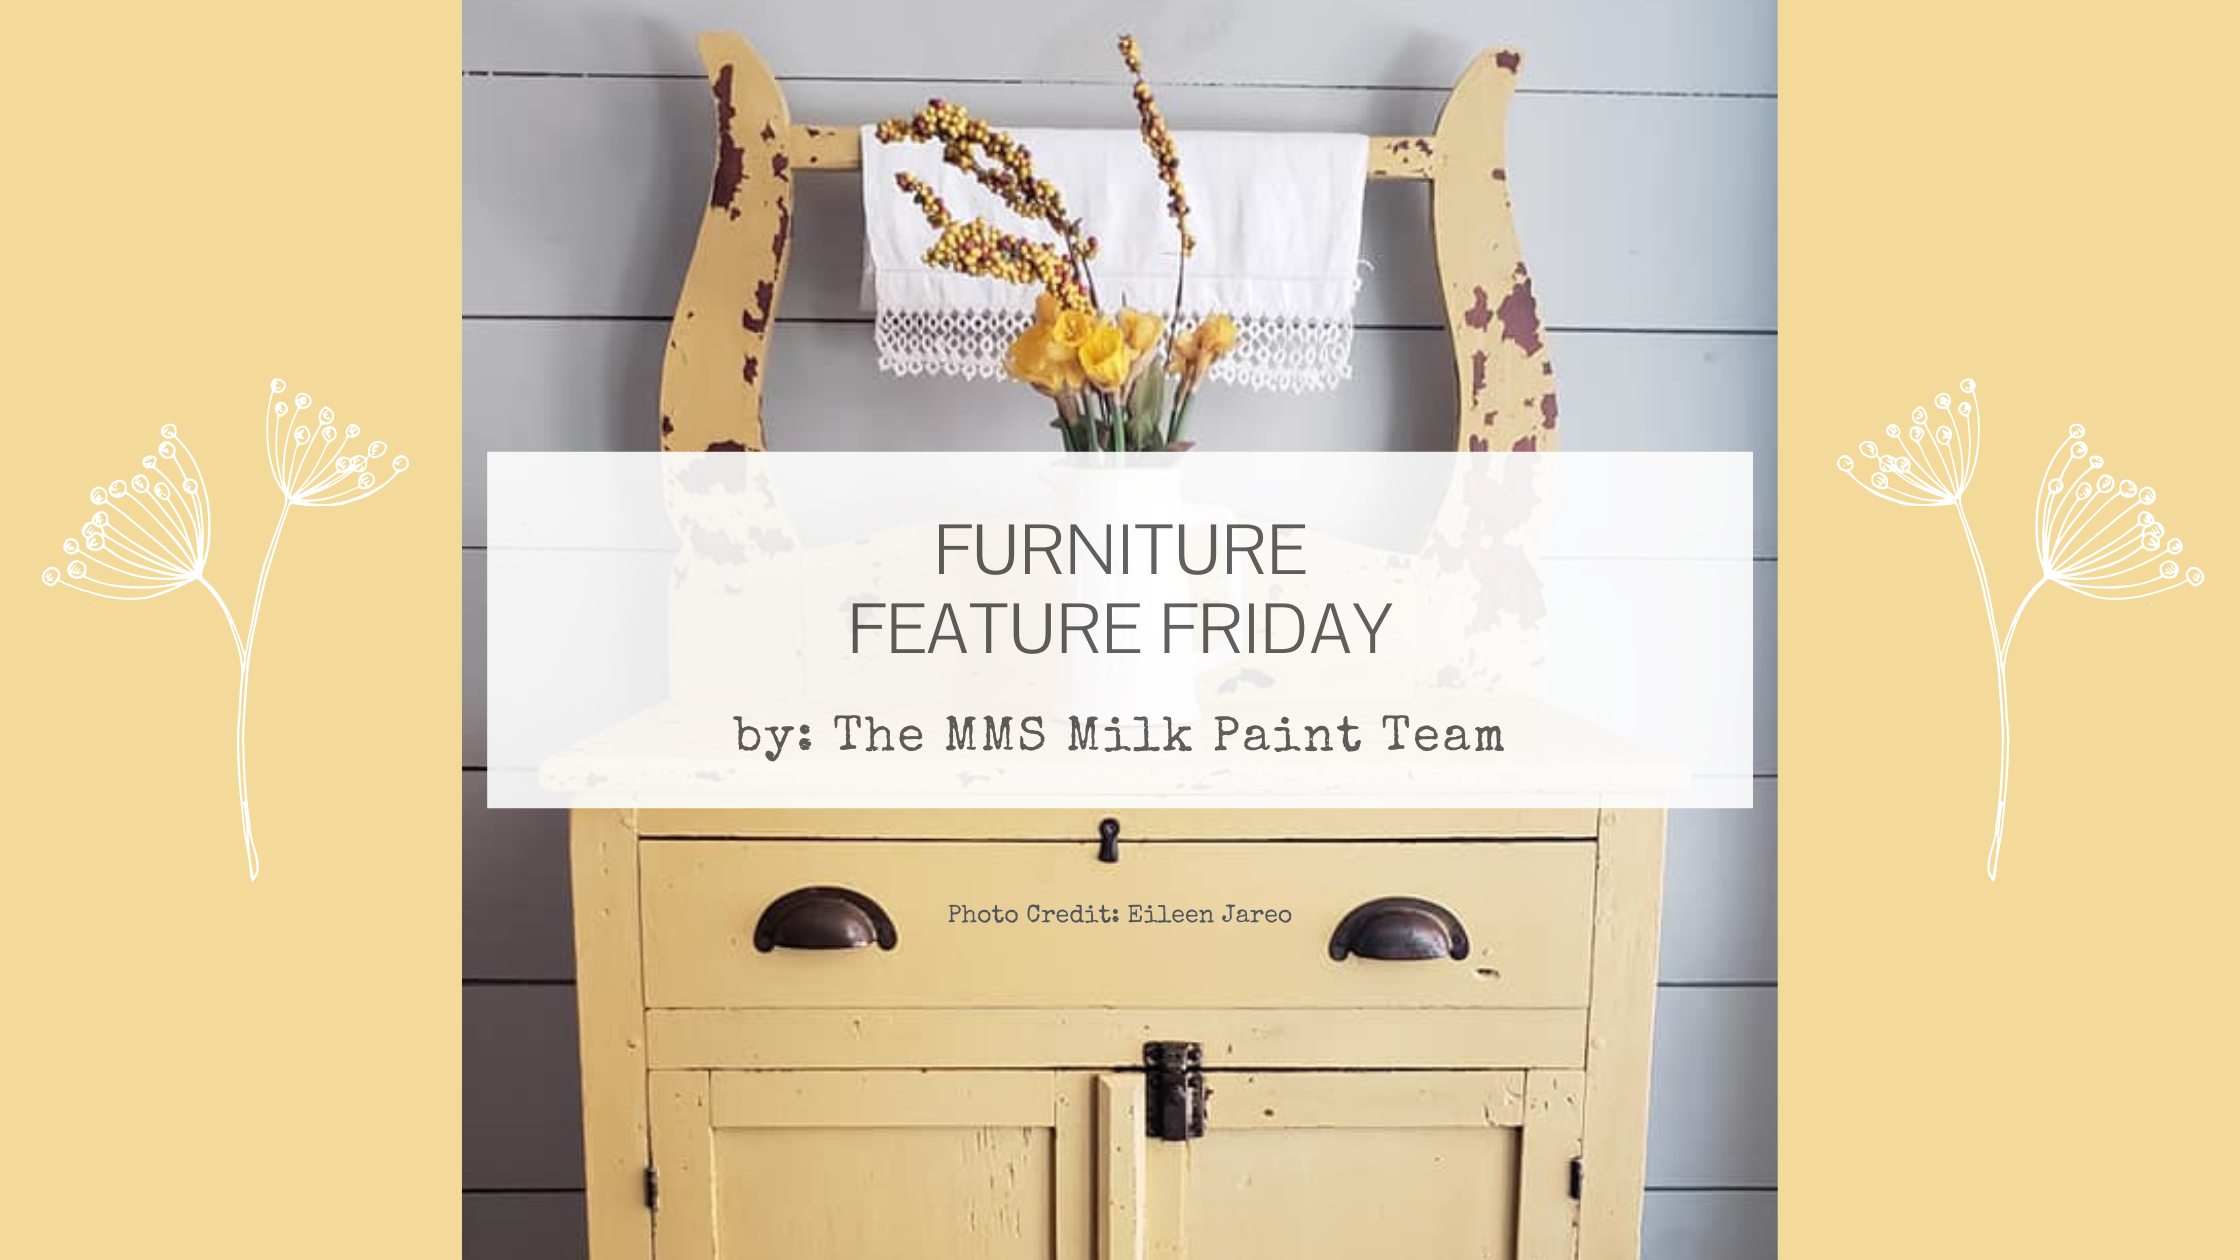 Mustard Seed Yellow Milk Paint – Simply Chic Furniture